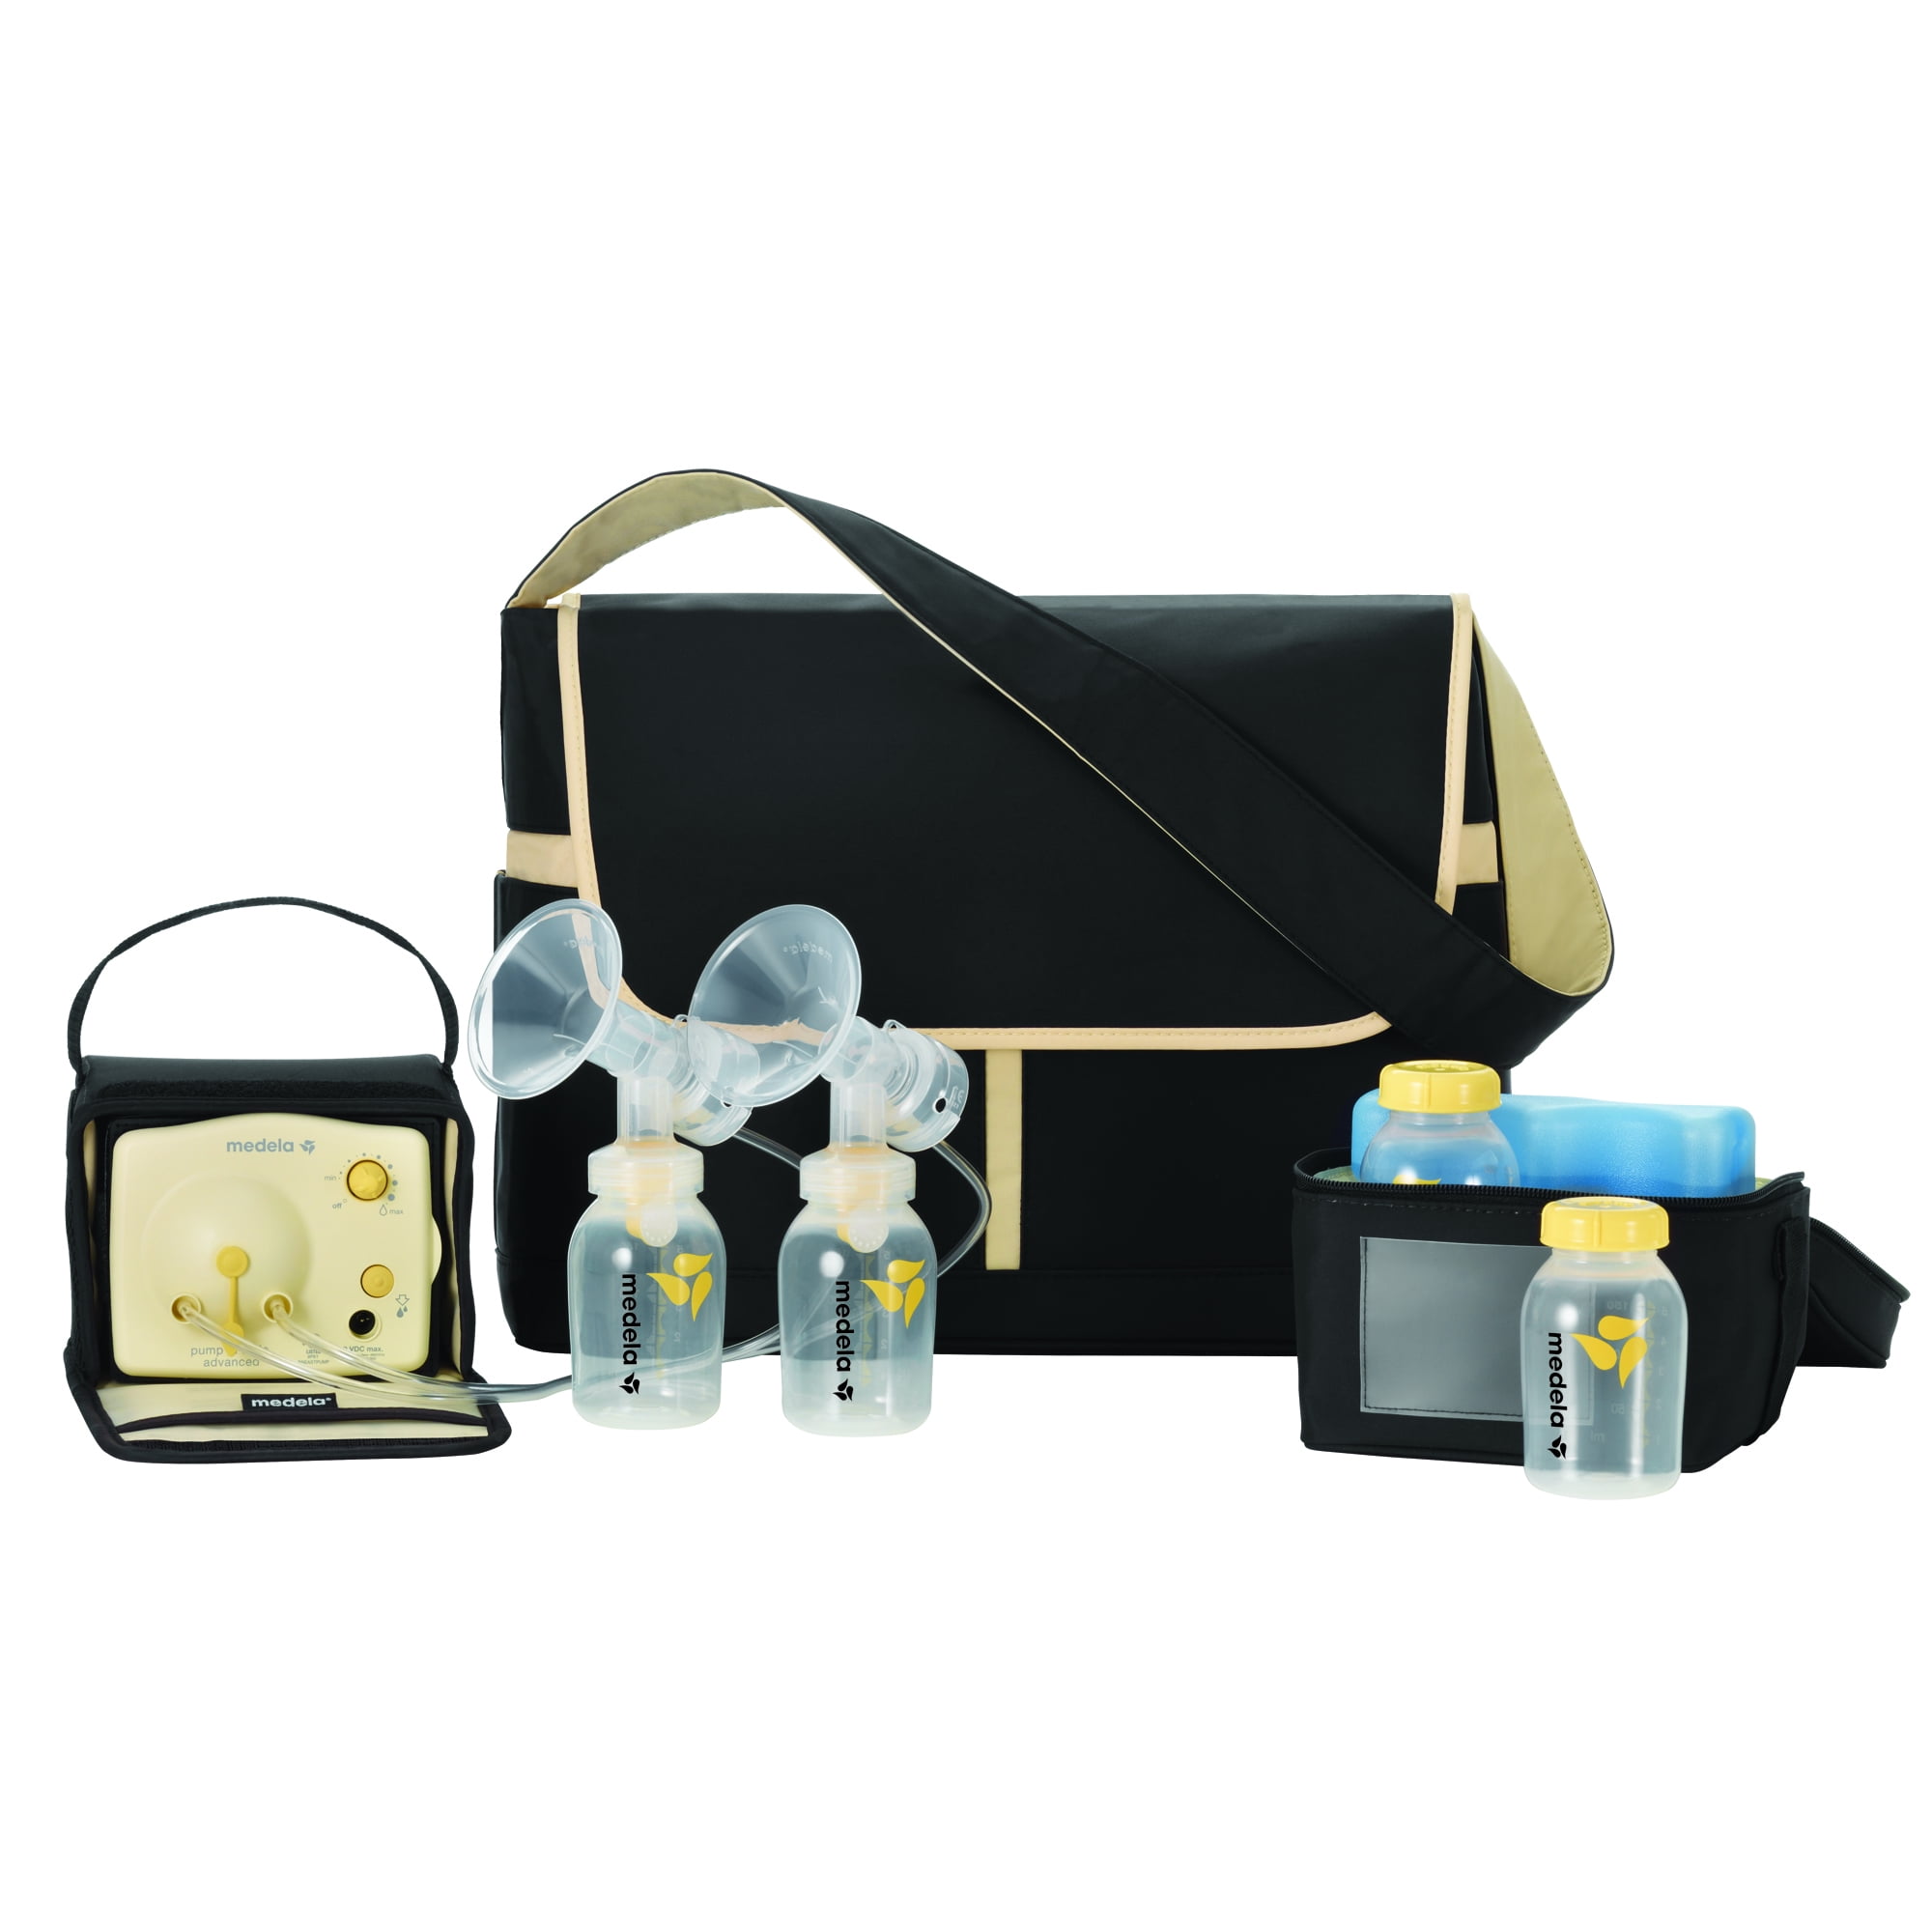 Medela Pump In Style® Advanced Double Electric Breast Pump, with Metro Bag  